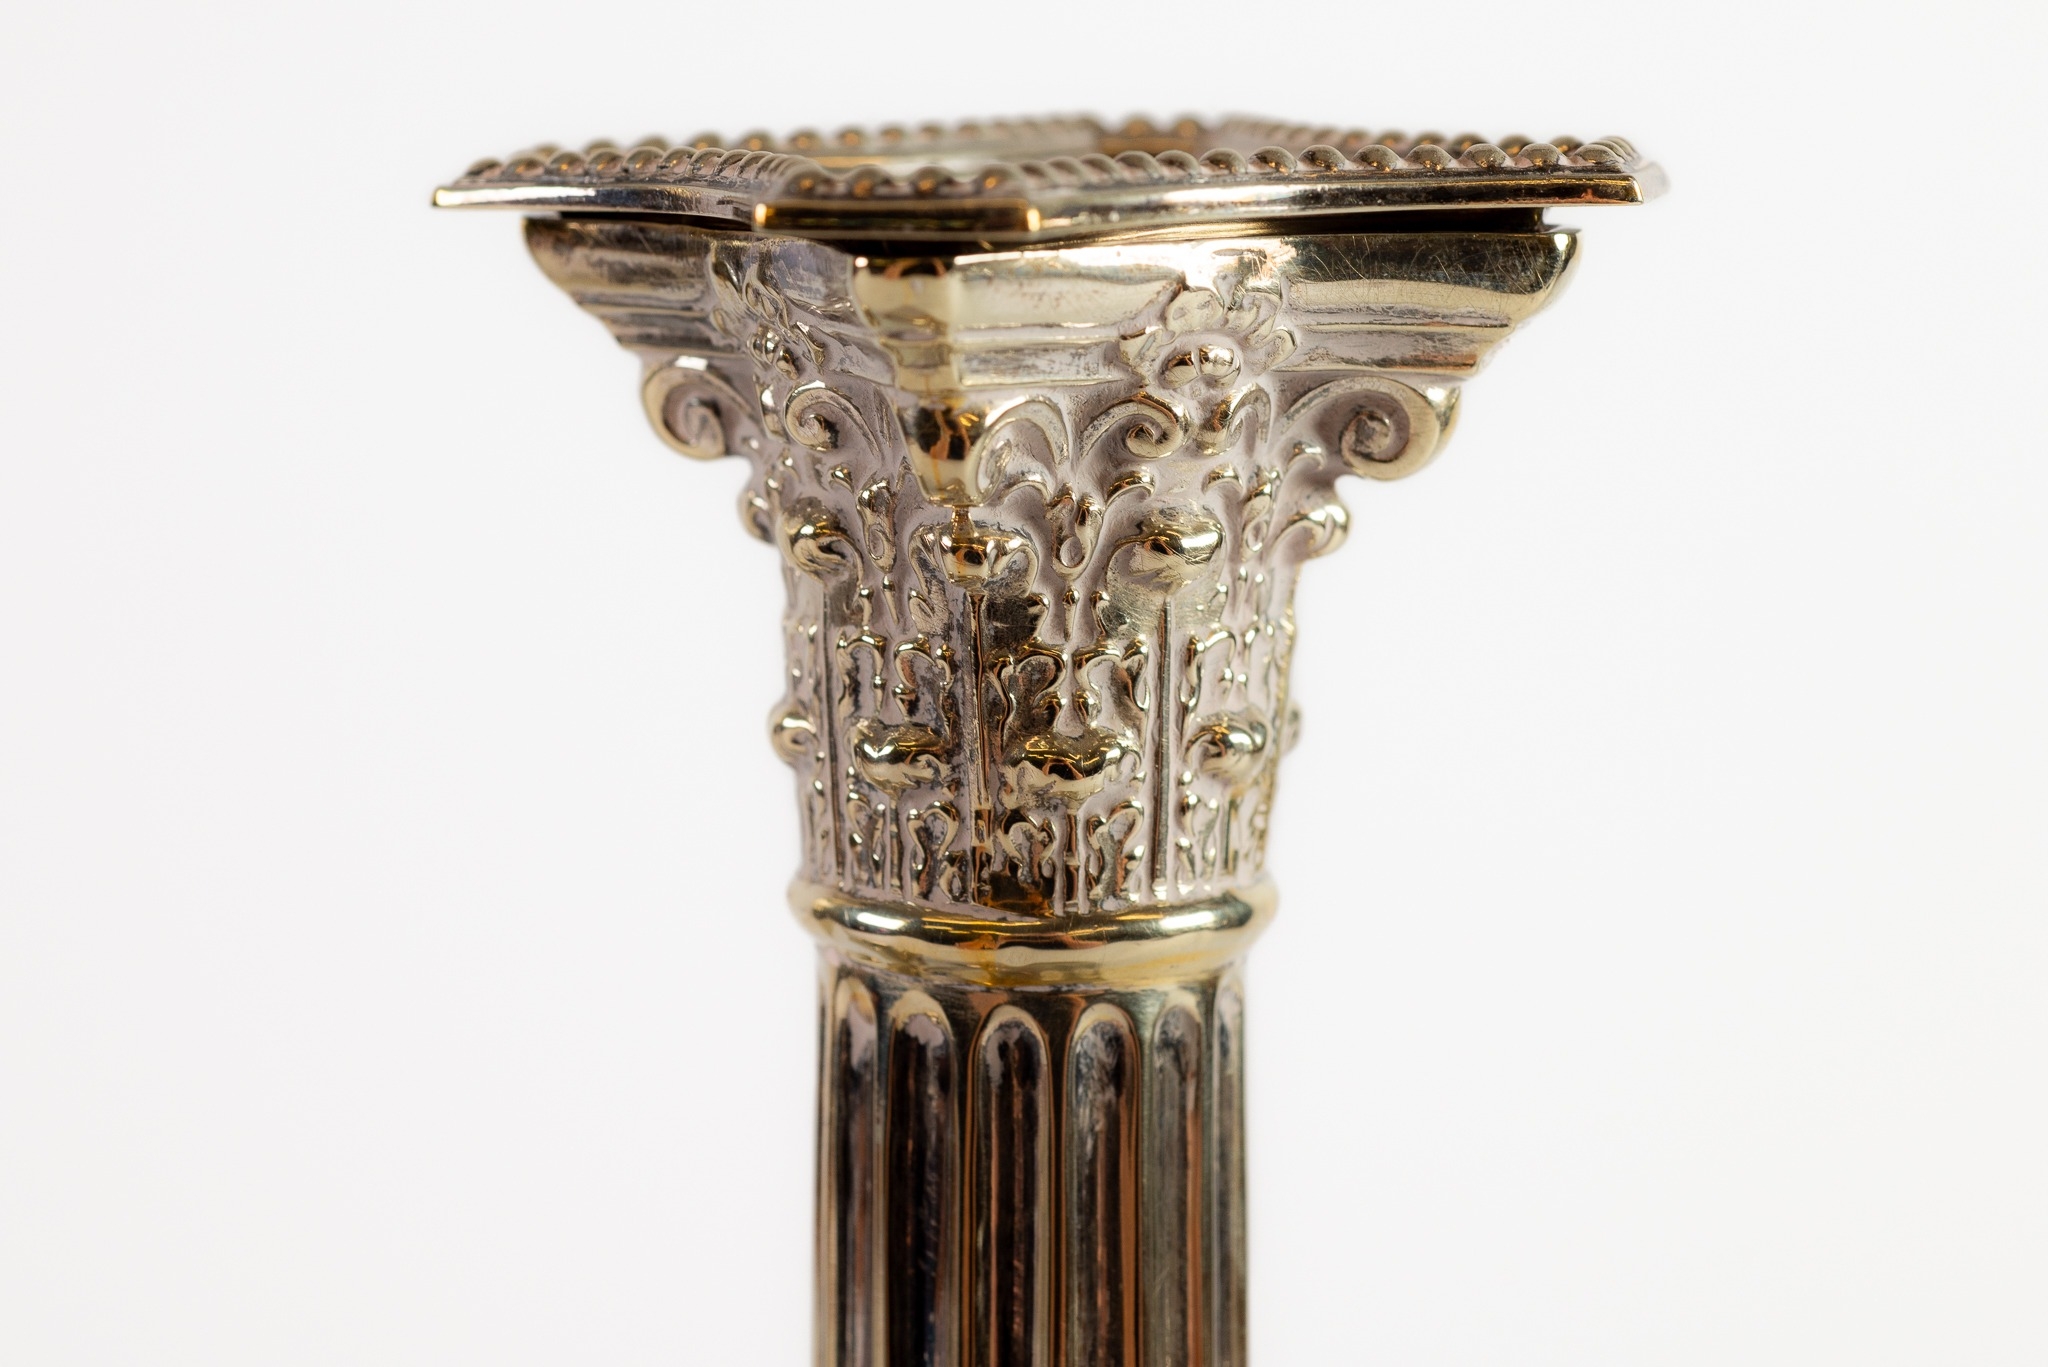 PAIR OF EDWARDIAN ELECTRO-PLATED CORINTHIAN COLUMN CANDLESTICKS WITH REMOVABLE SCONCES (2) - Image 4 of 4